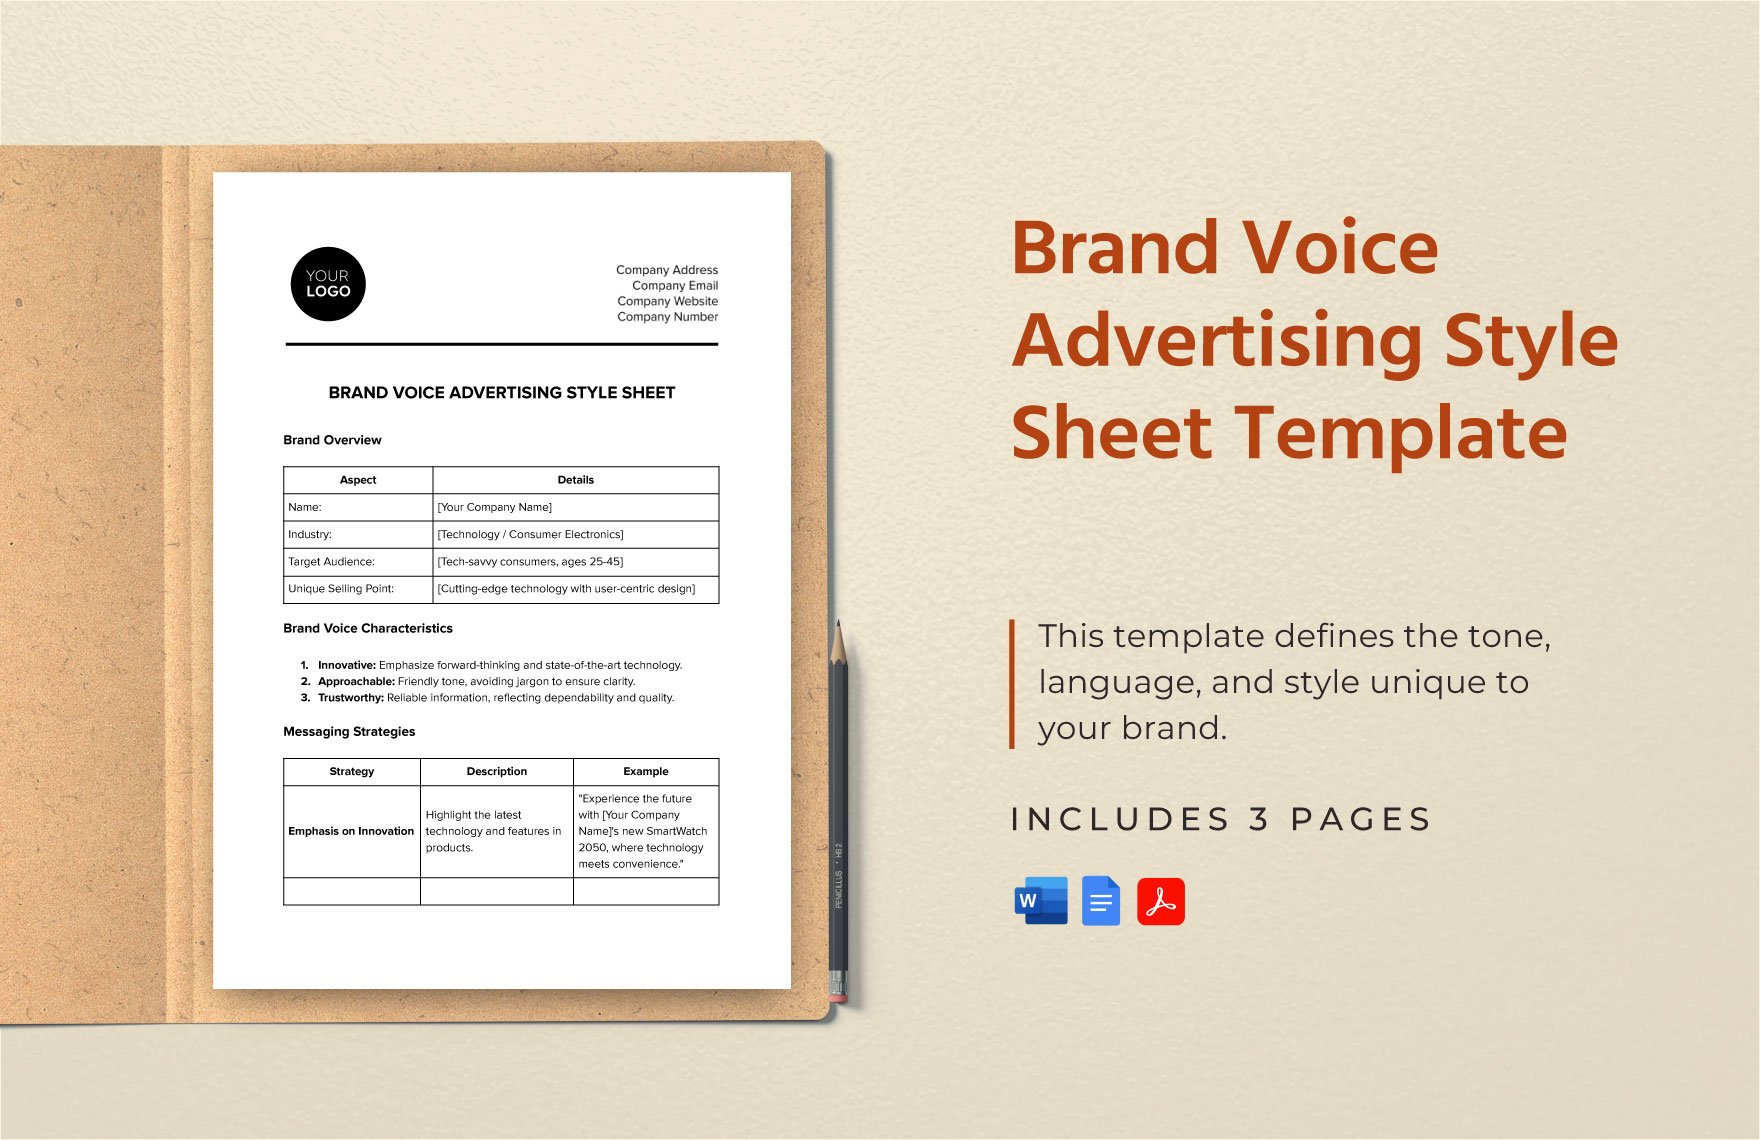 Brand Voice Advertising Style Sheet Template in Word, Google Docs, PDF